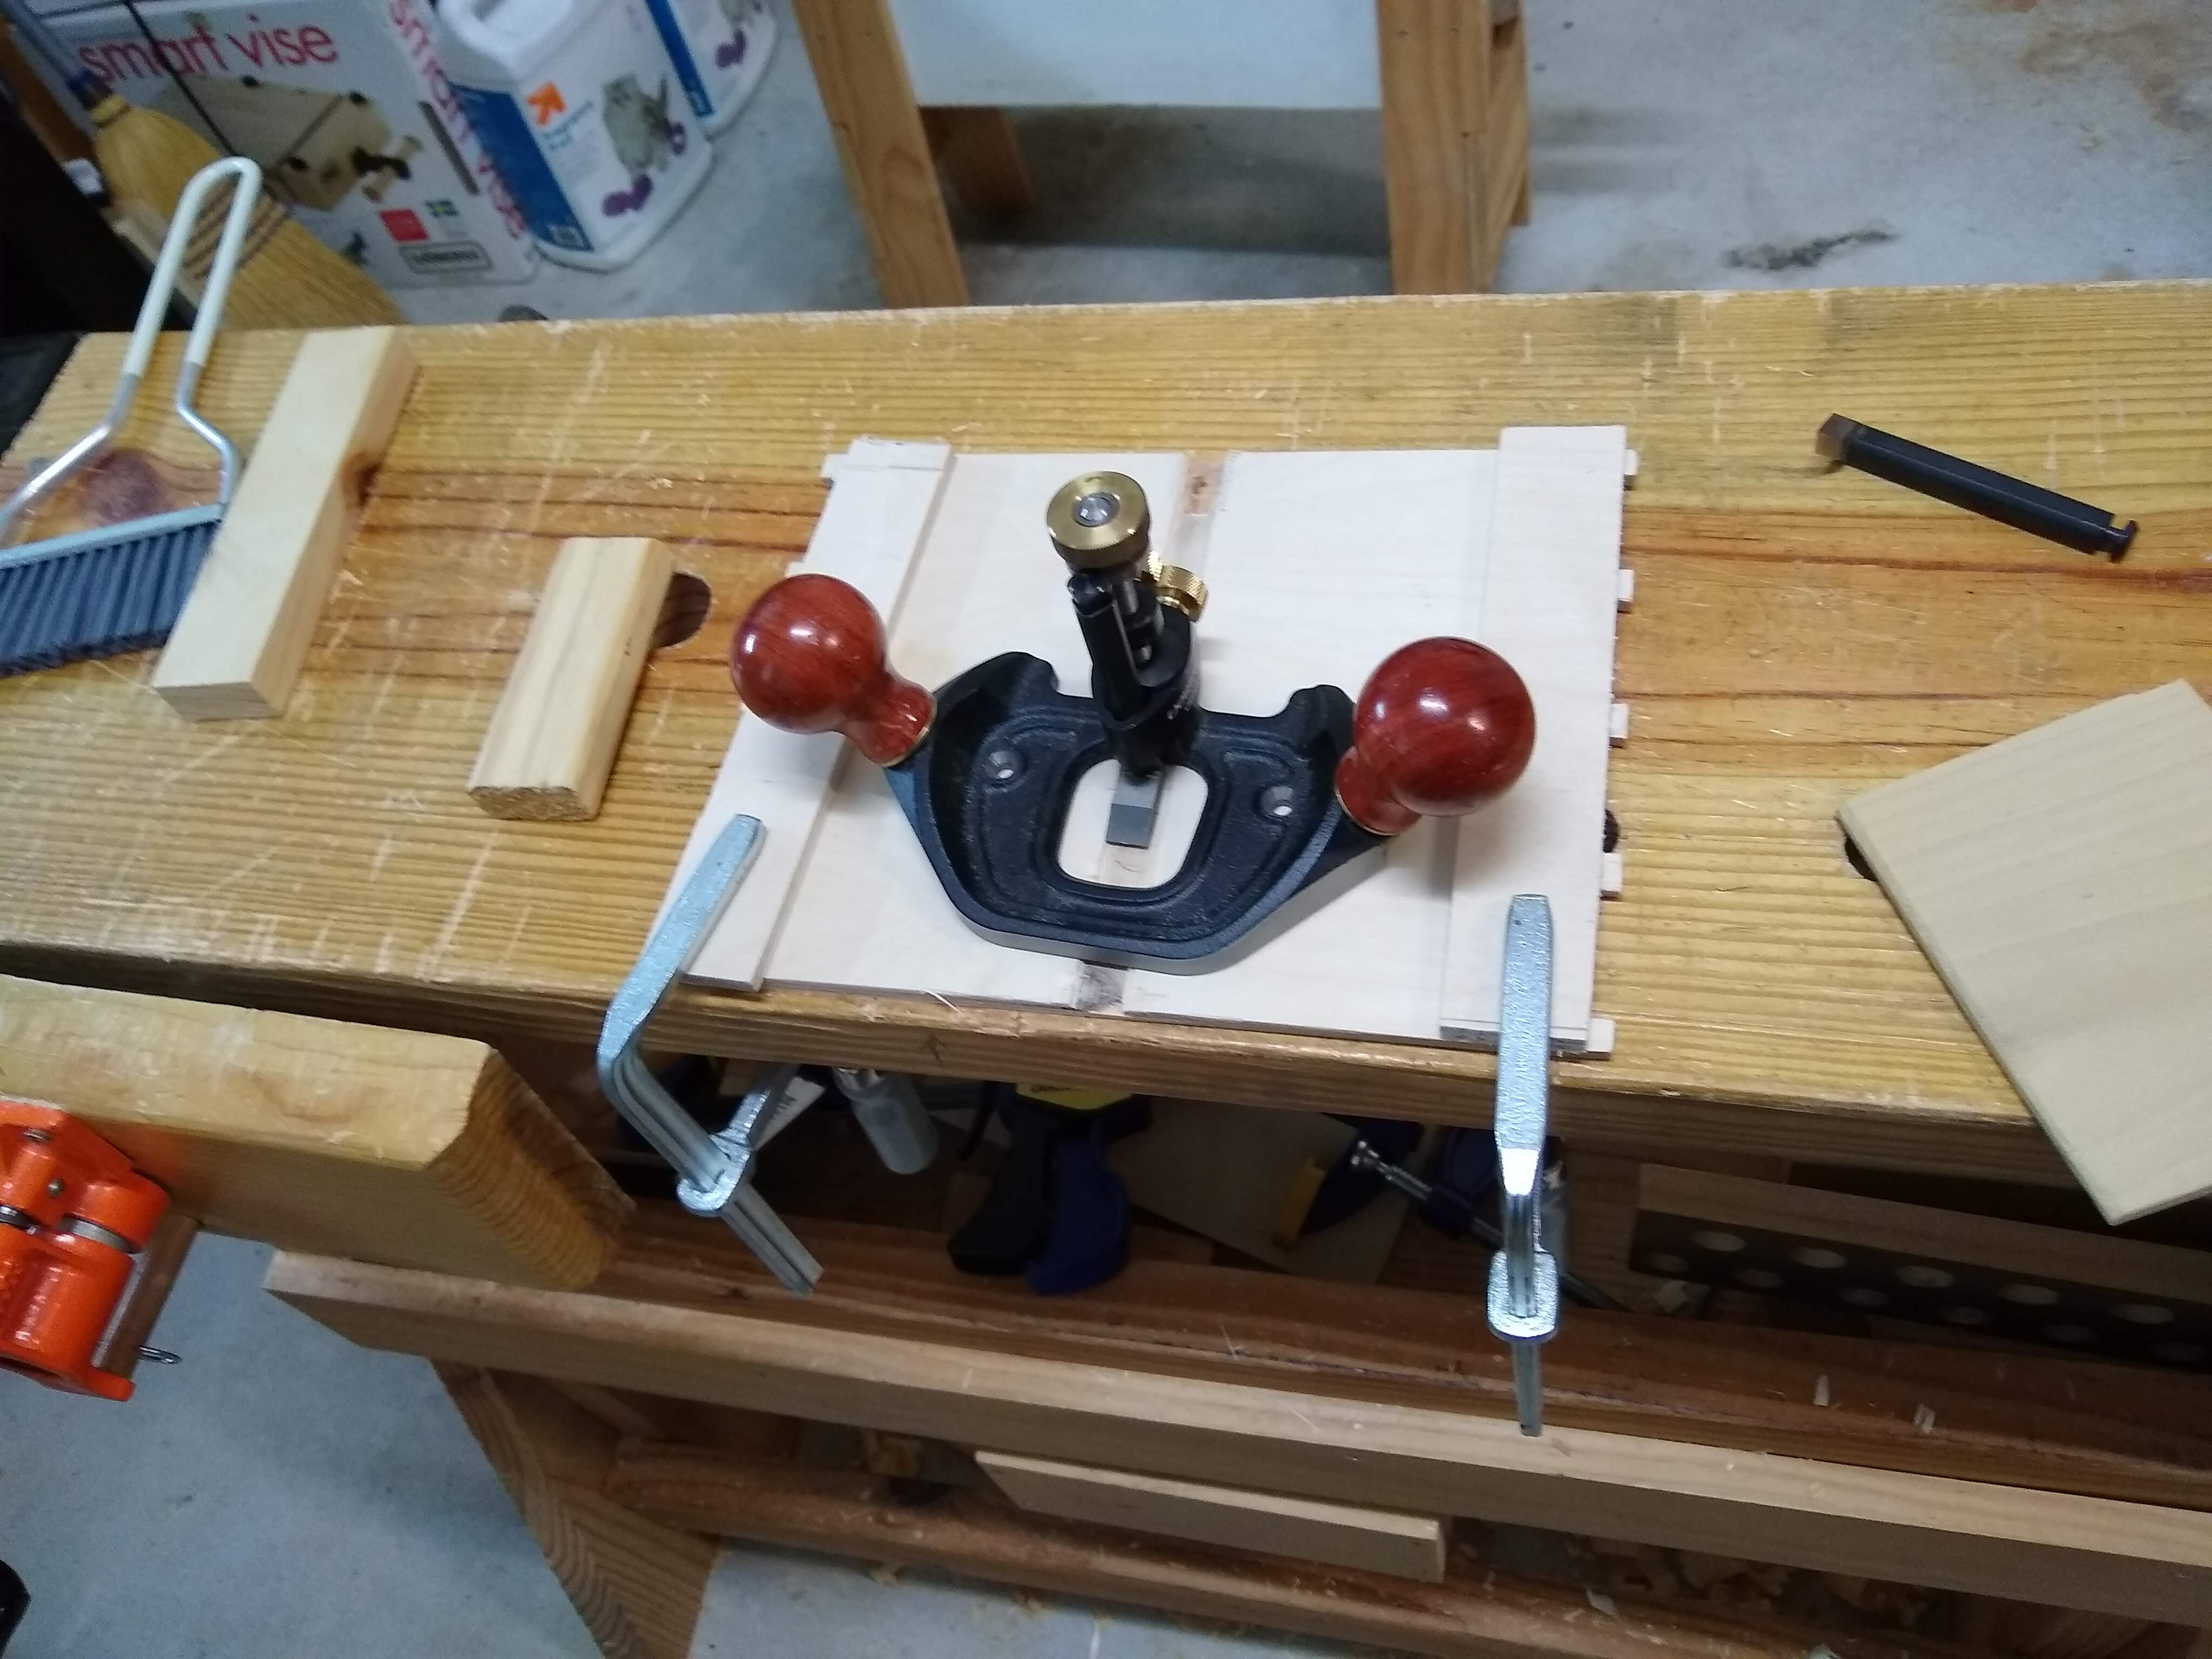 06_Cleaning out dado with router plane_6.27.20.jpg